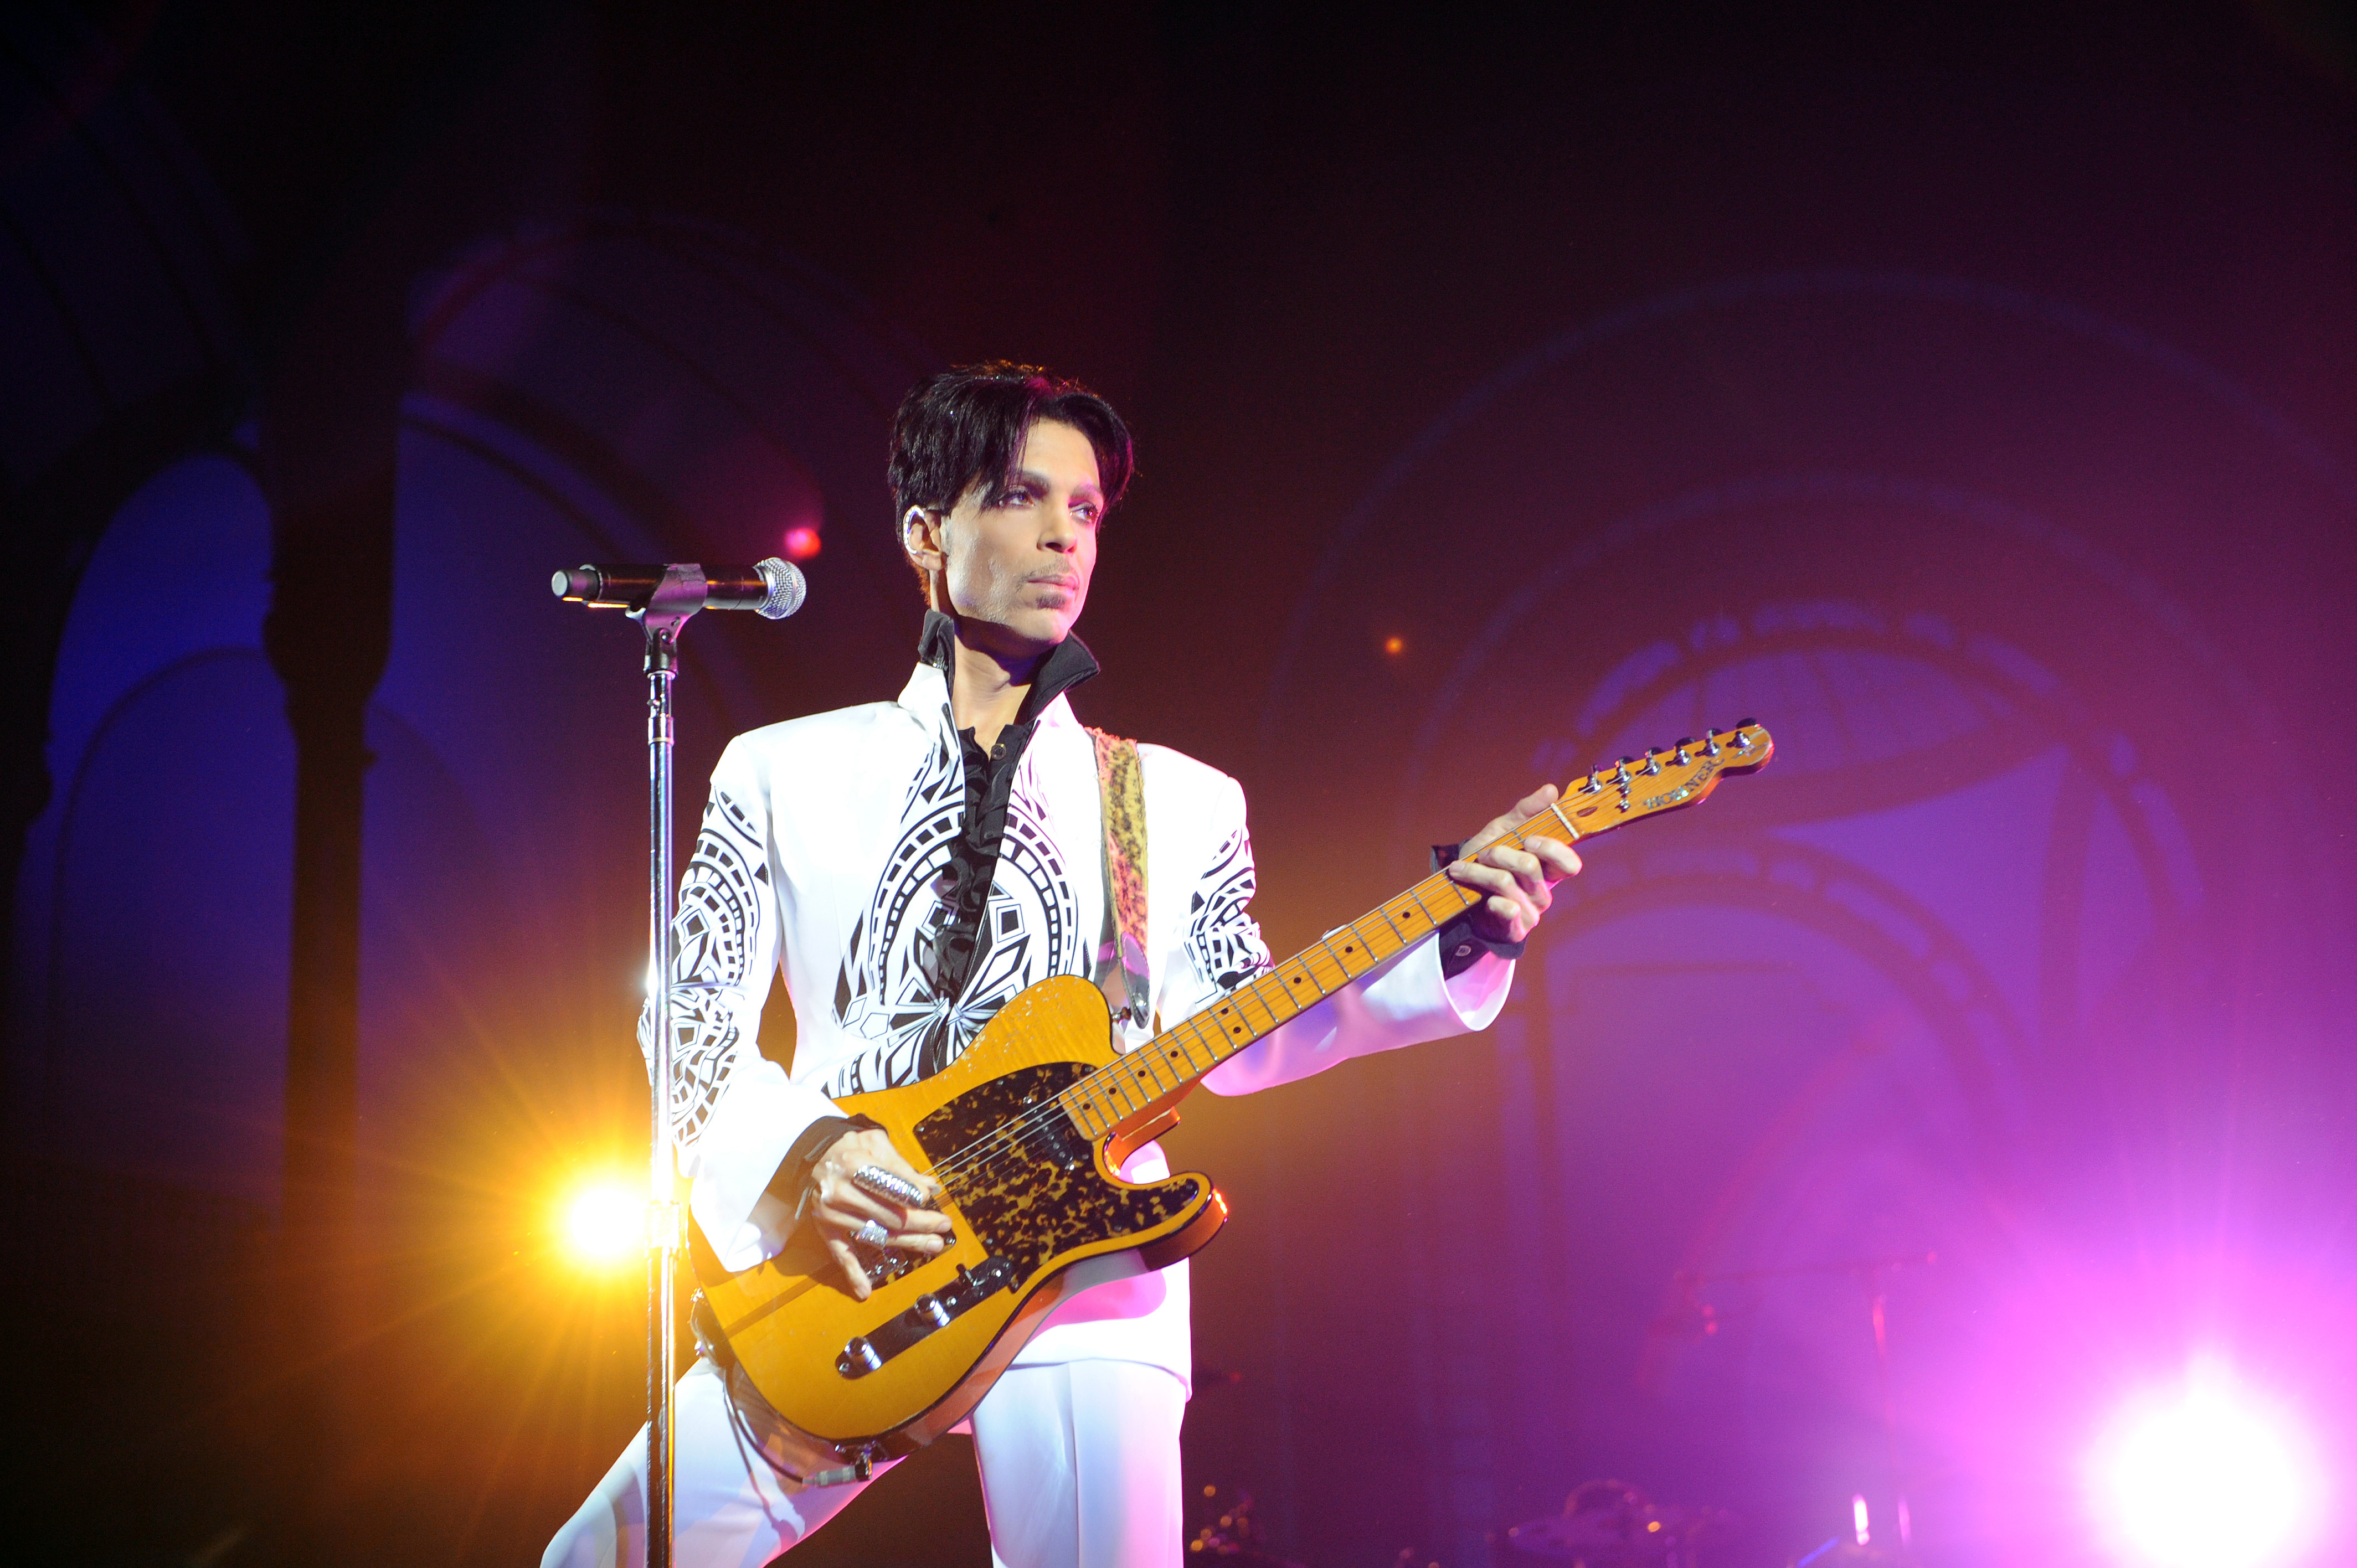 US singer Prince performs on October 11, 2009 at the Grand Palais in Paris. (Bertrand Guay&mdash;Getty Images)